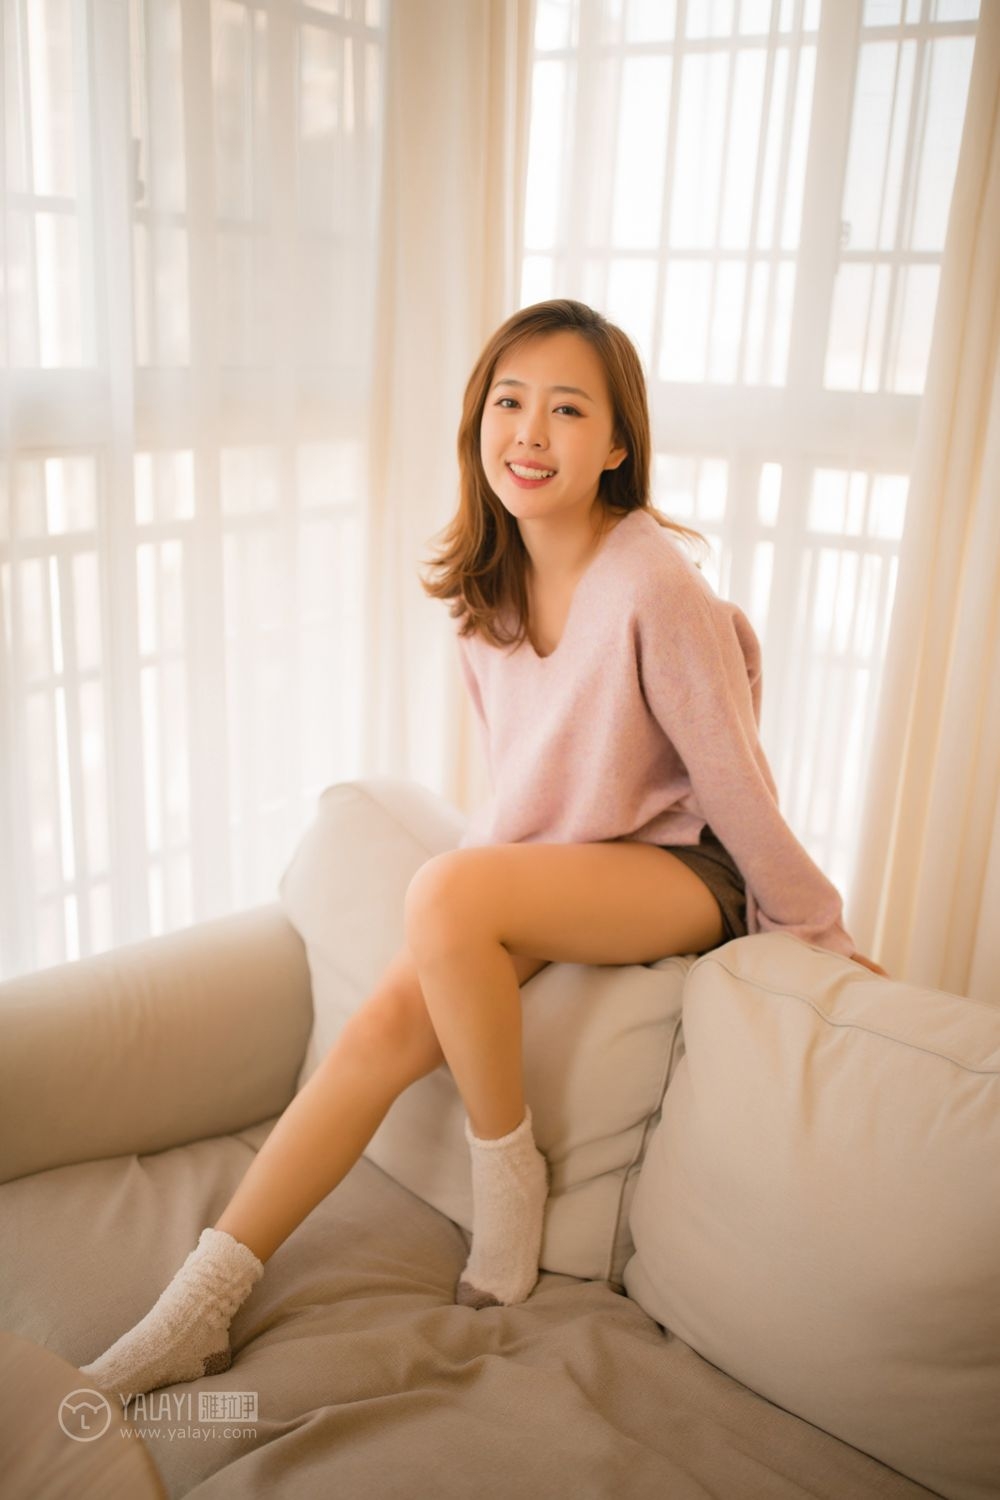 Young girl 26 years old beautiful tenant smiling sexy legs dynamic private portrait(5)